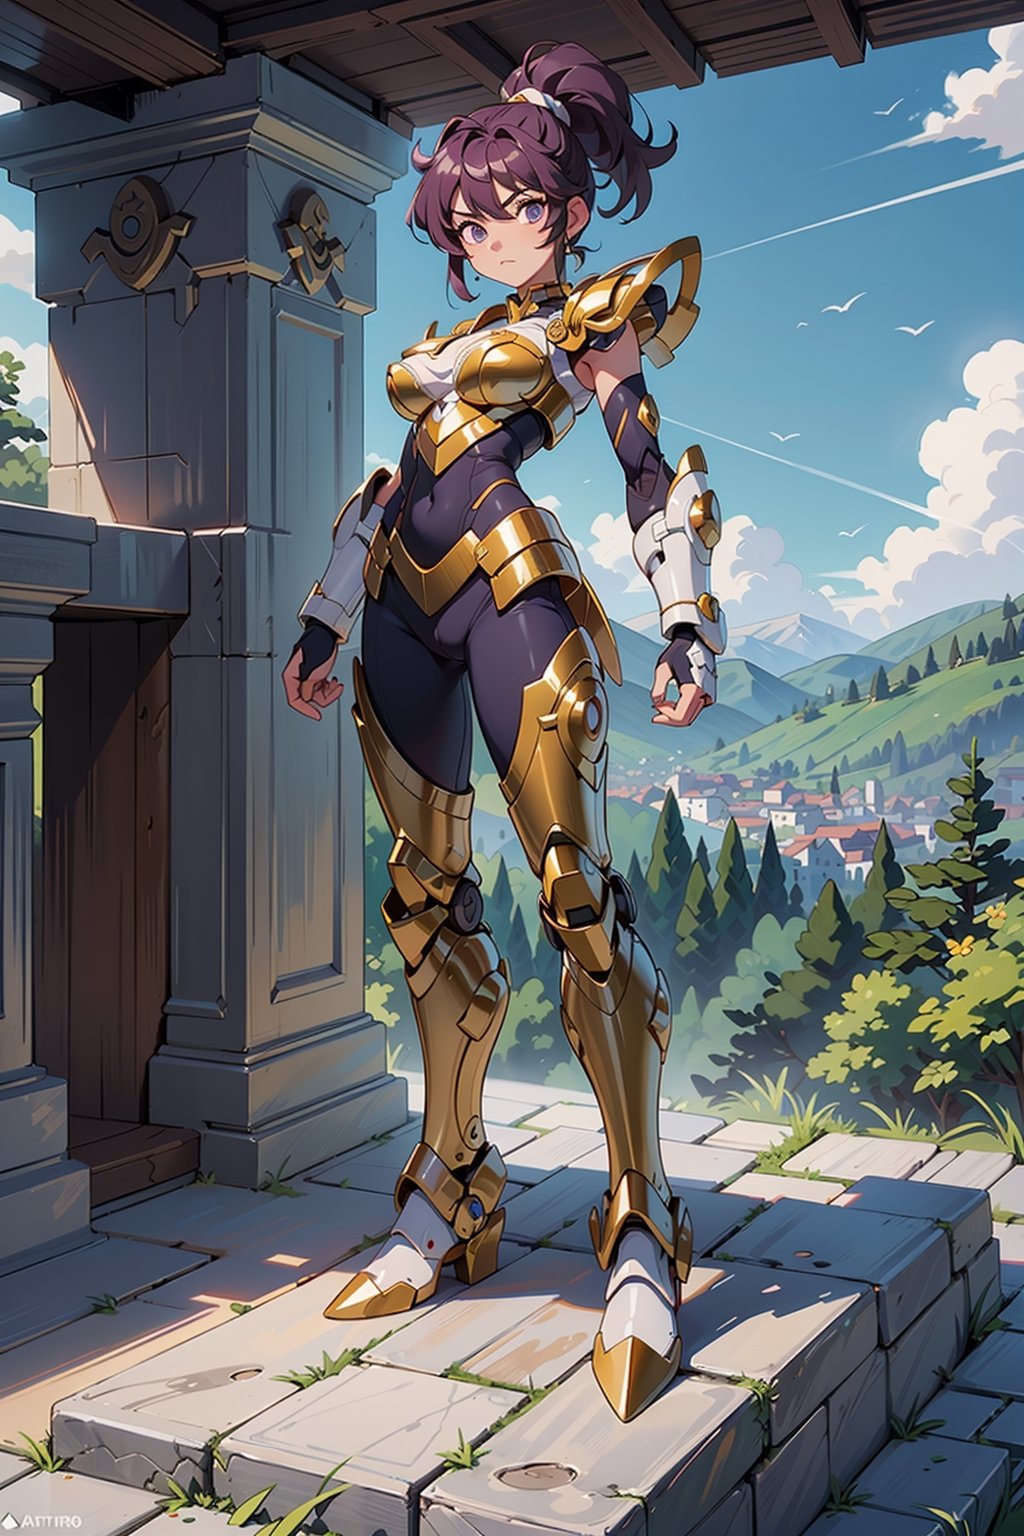 A girl, wearing gold armor+robotic suit, extremely large breasts, purple hair, short hair, hair with ponytail, hair with bangs covering the eye, no helmet on the head, (((staring at the viewer, pose interacting and leaning [on something| on an object]))), in an ancient Greek temple in the mountains, with various alters, structures, marble statues, beautiful landscape, ((full body):1.5), 16k, UHD, best possible quality, ultra detailed, best possible resolution, Unreal Engine 5, professional photography, well-detailed fingers, well-detailed hand, perfect_hands, ((saint seiya style, mecha style)), action pose, sexy,
prado verde con flores y arboles al fondo junto a un castillo en una montaña, cielo despejado con pocas nubes y soleado,leoarmor